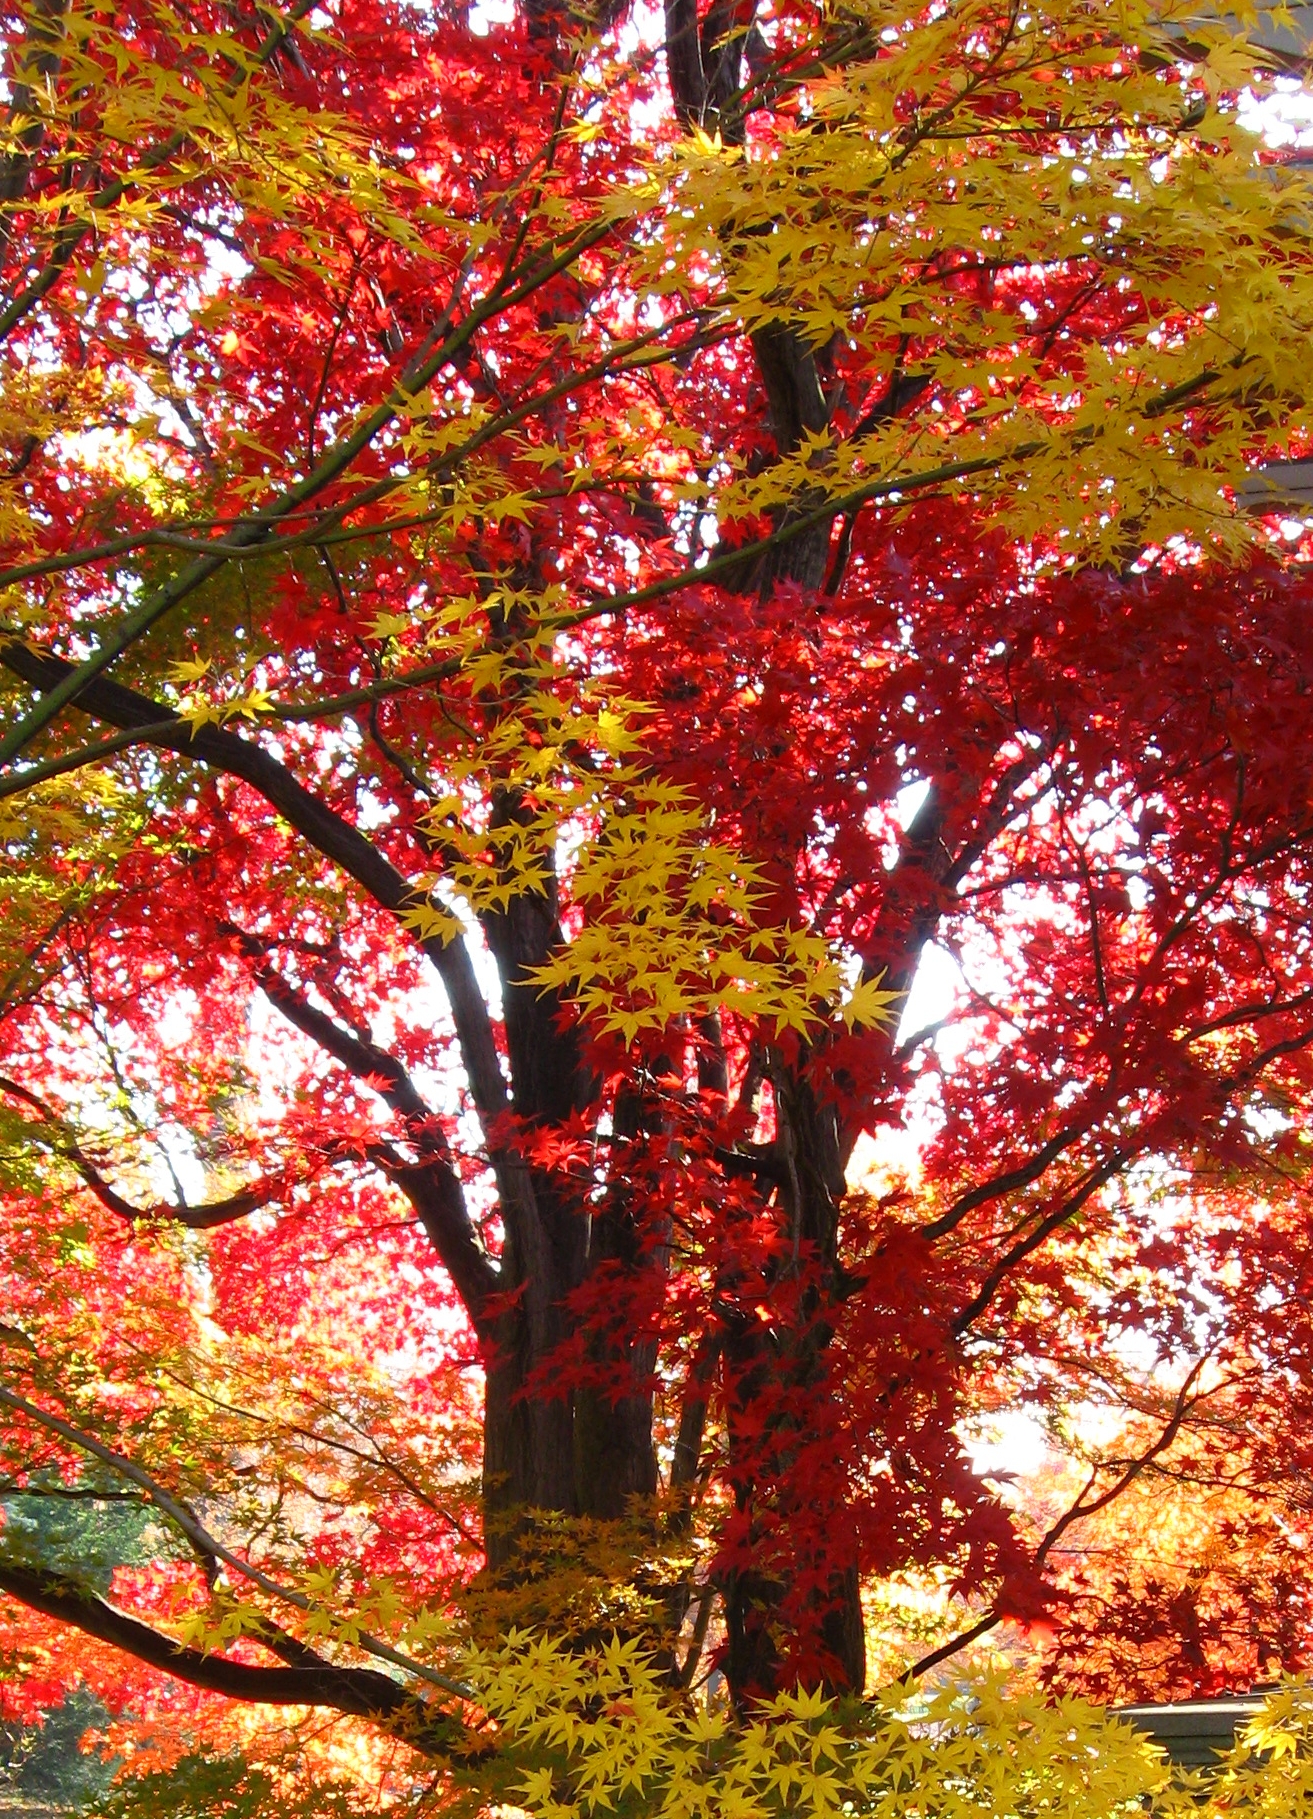 there is a large tree with red leaves on it